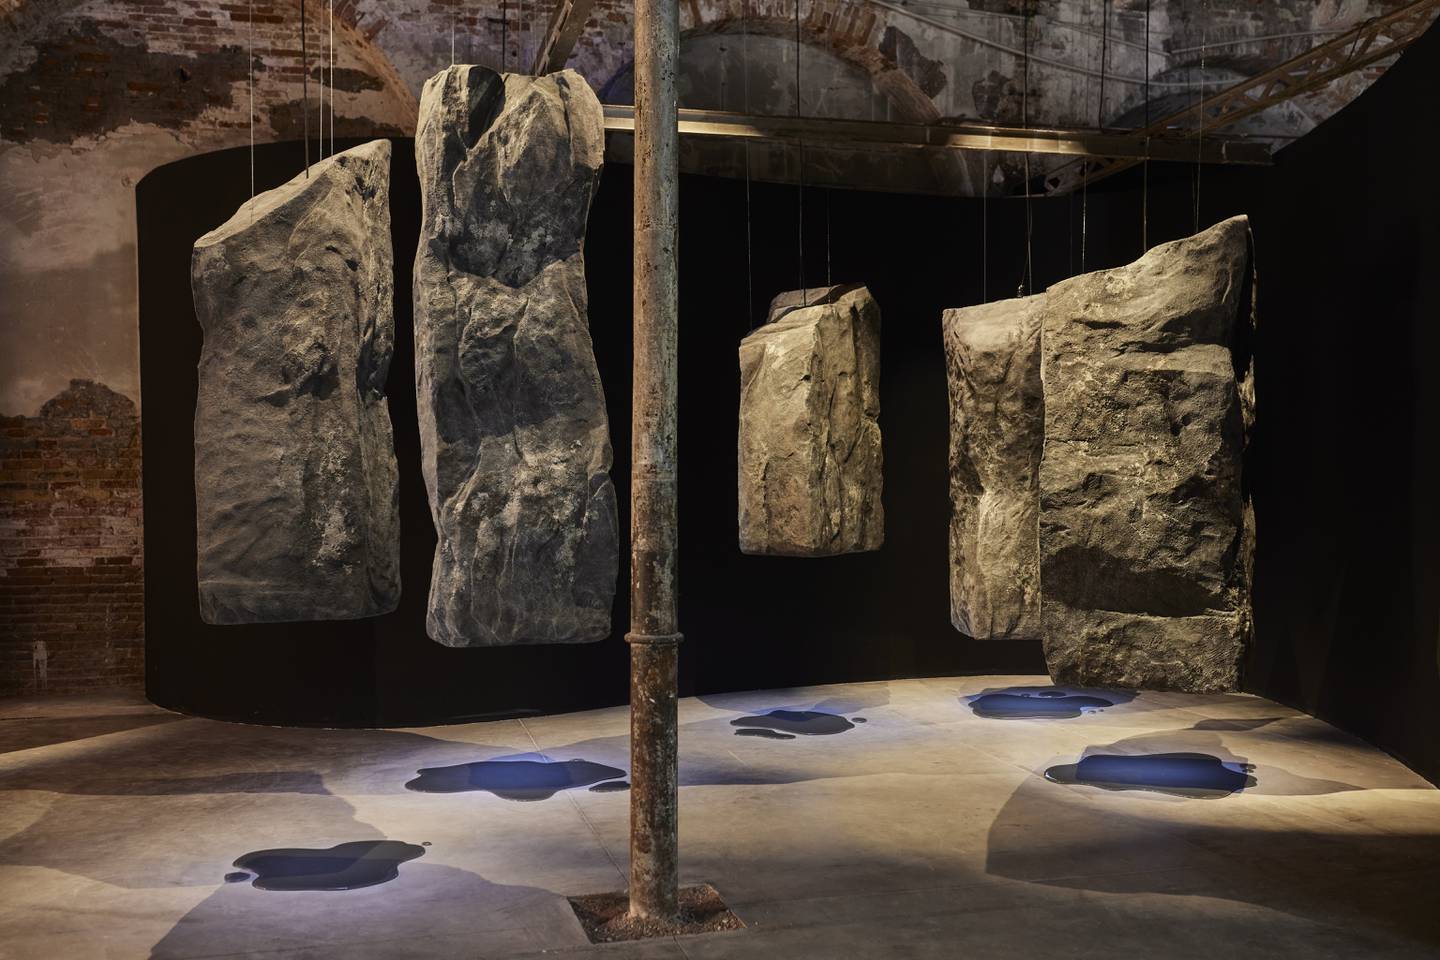 Budoor Al Riyami's installation 'Breathe' (2022) in the first Oman Pavilion, curated by Aisha Stoby, at the Venice Biennale. Photo: David Levene